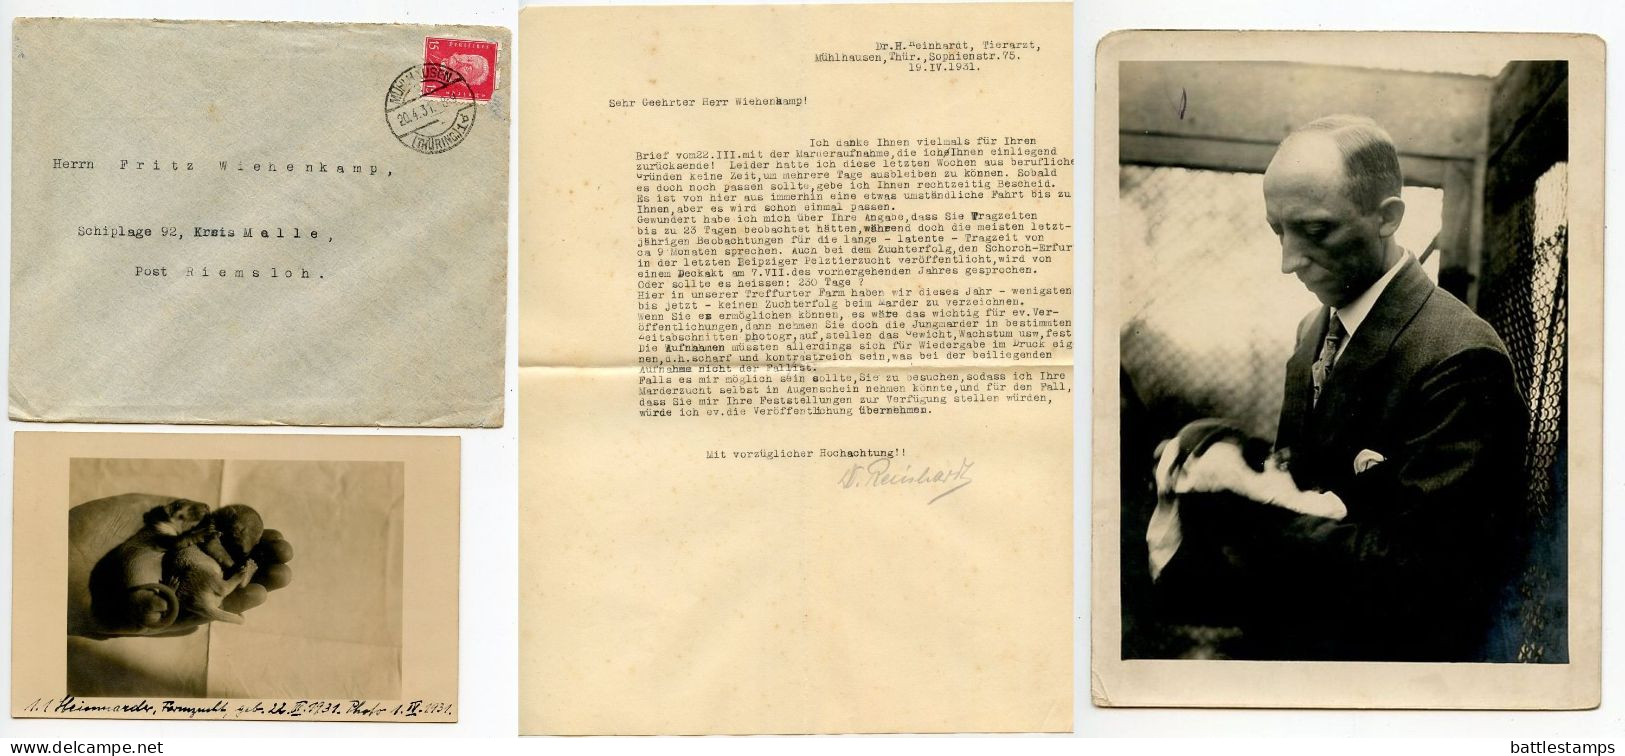 Germany 1931 Cover W/ Letter, Postcard & Photo; Mühlhausen - Dr. H. Reinhardt, Tierarzt (Veterinarian); 15pf. Hindenburg - Covers & Documents